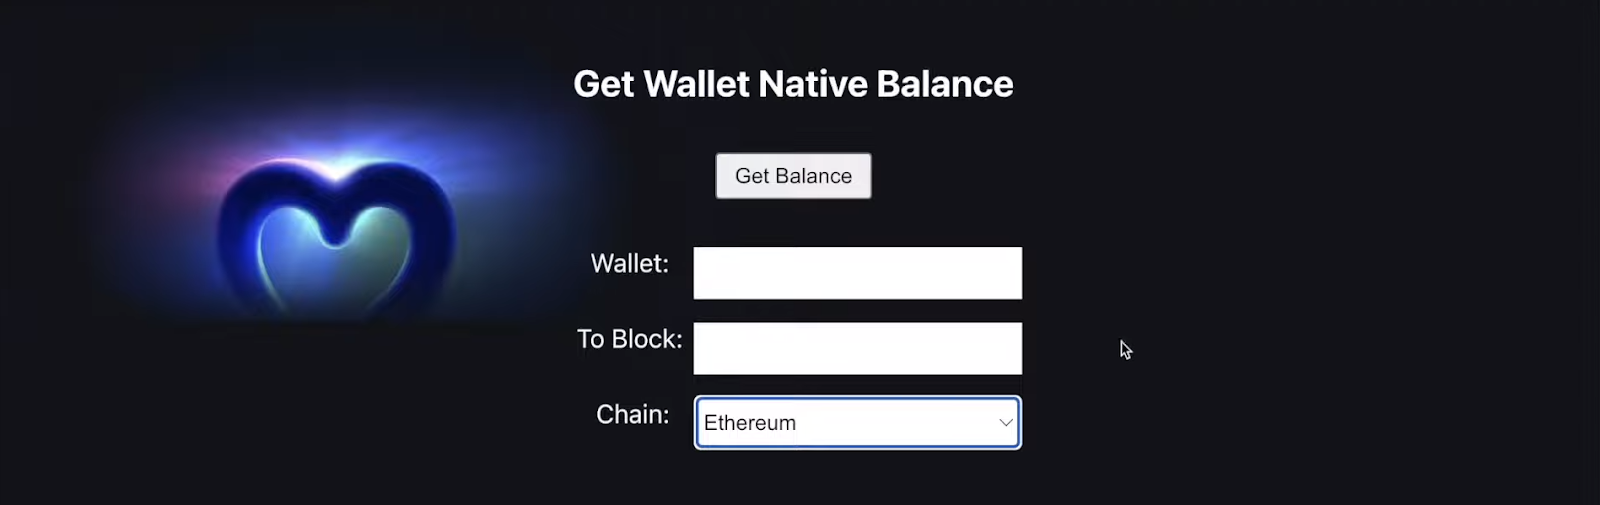 Blank black page with a white title that states Get Wallet Native Balance Explorer.